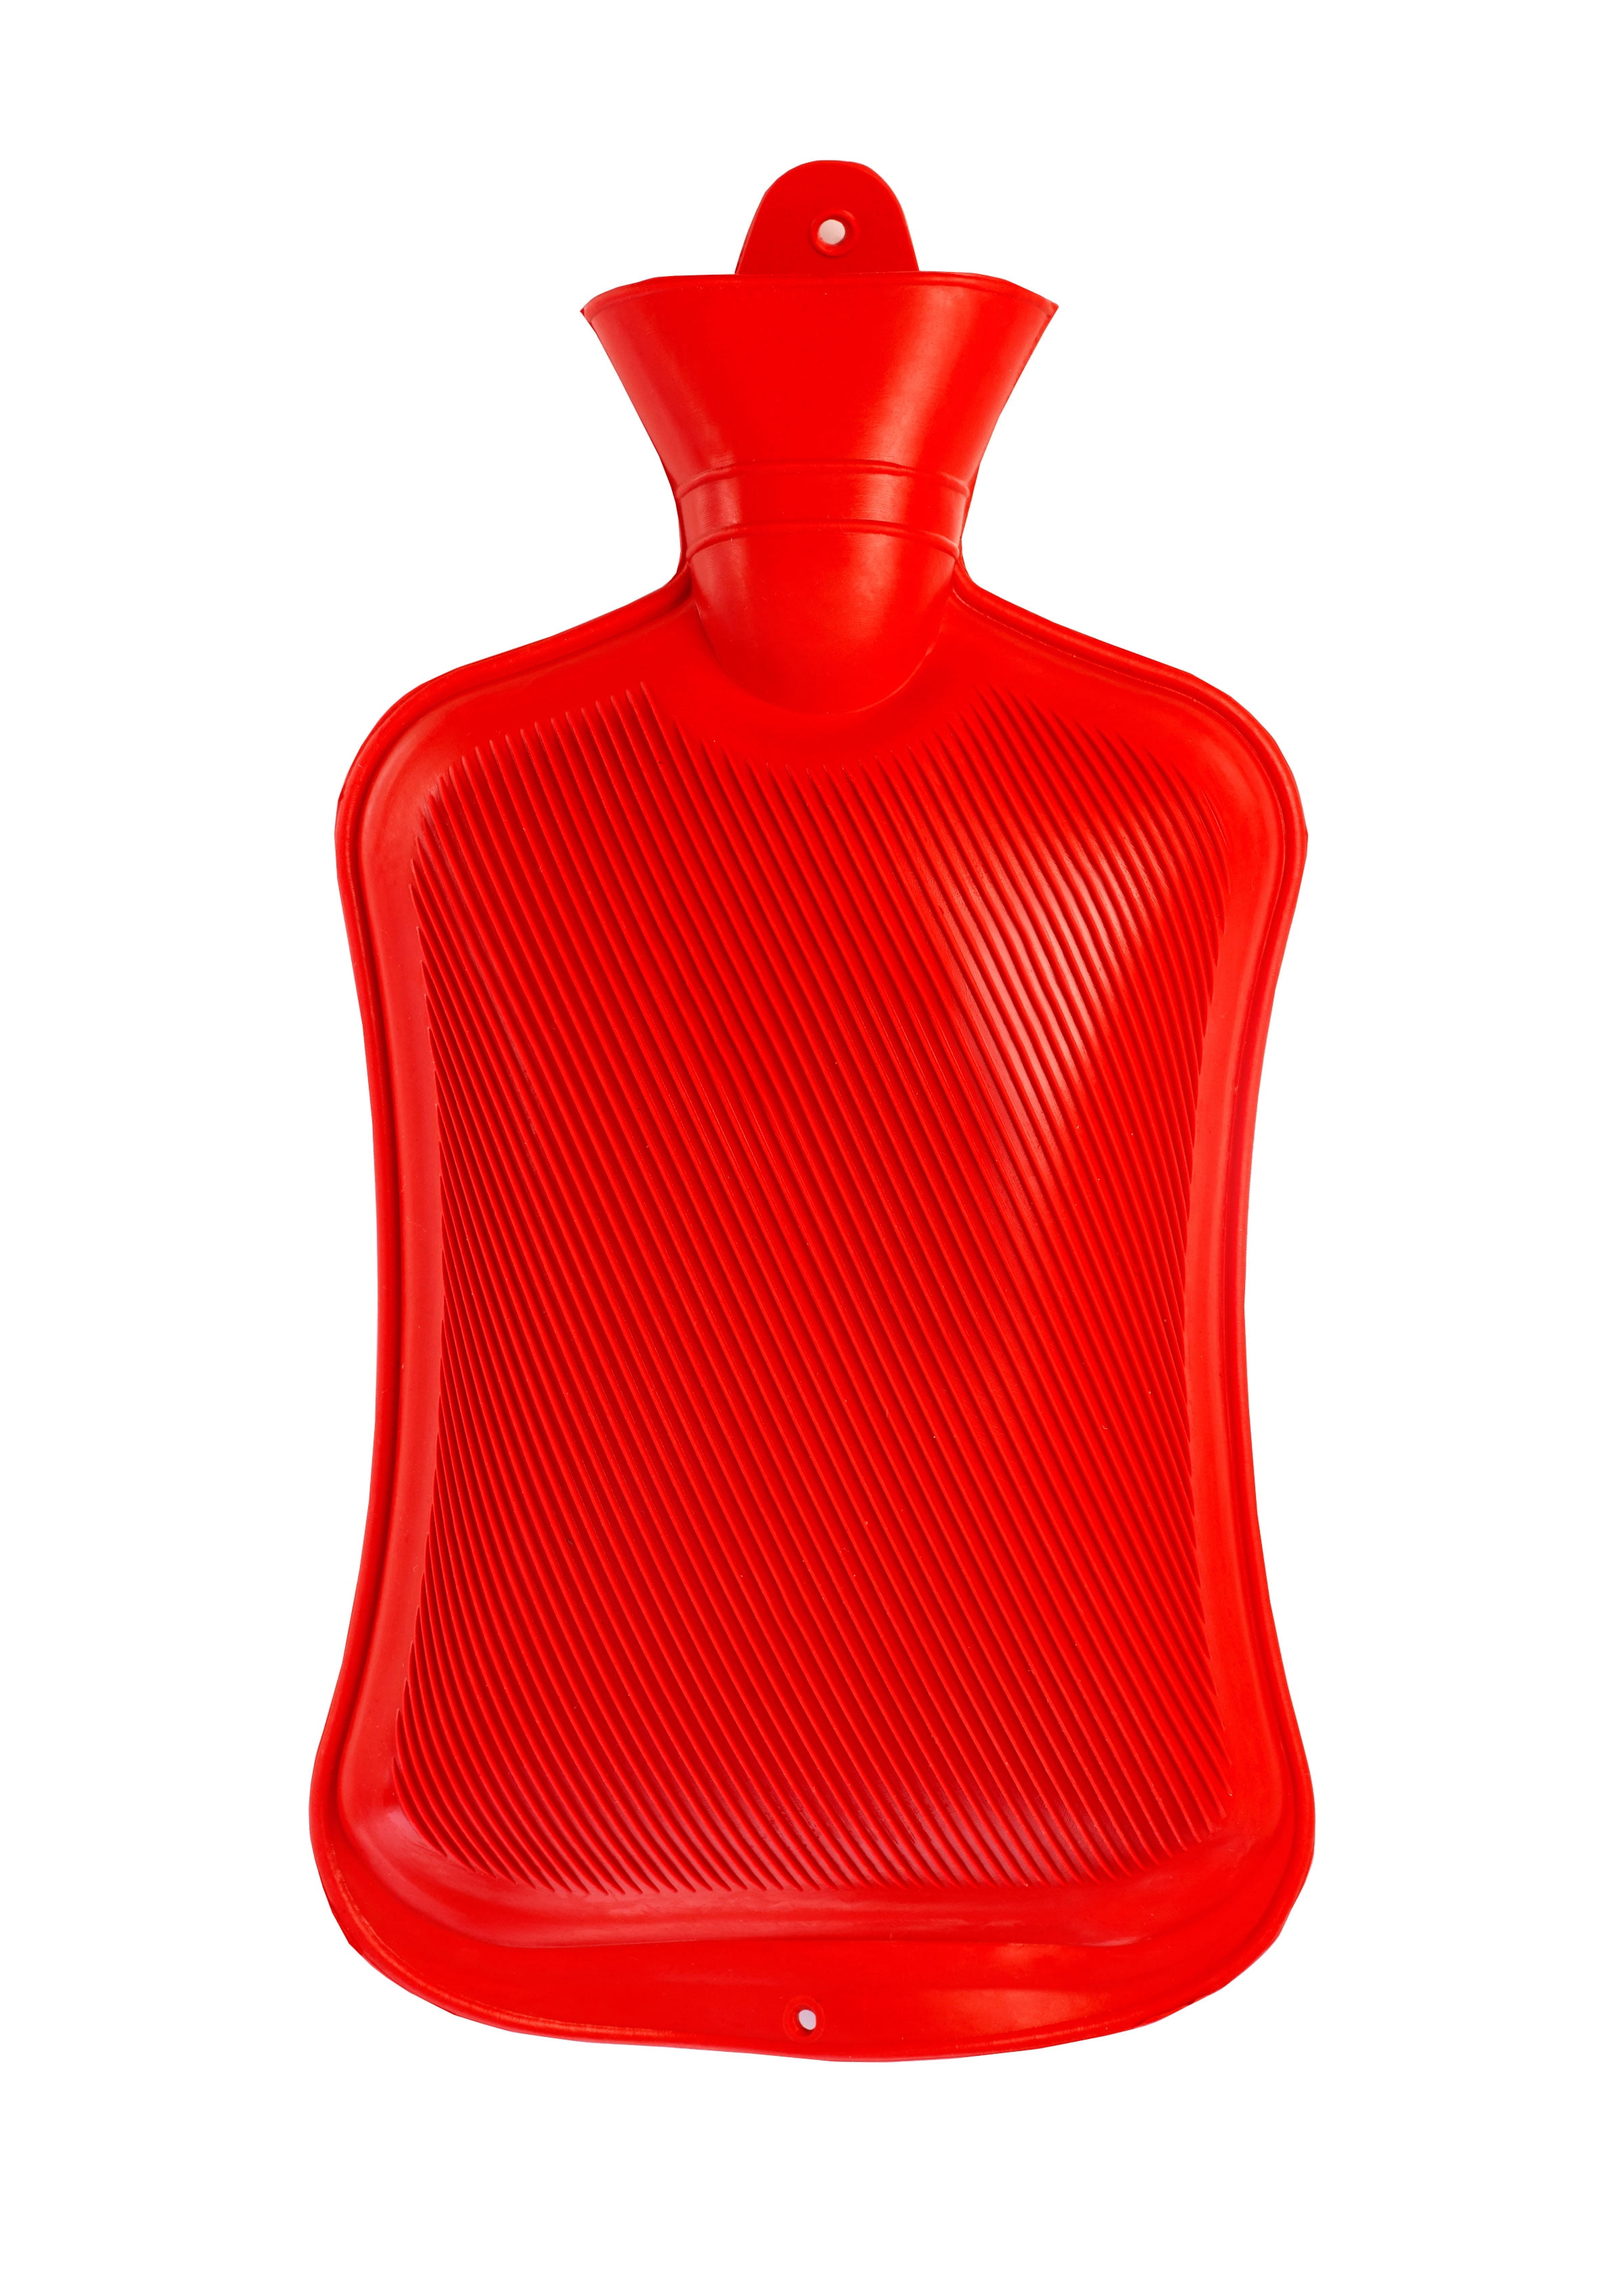 Hot Water Bottle in Pink. Tested and compliant for your safety. Hot Date